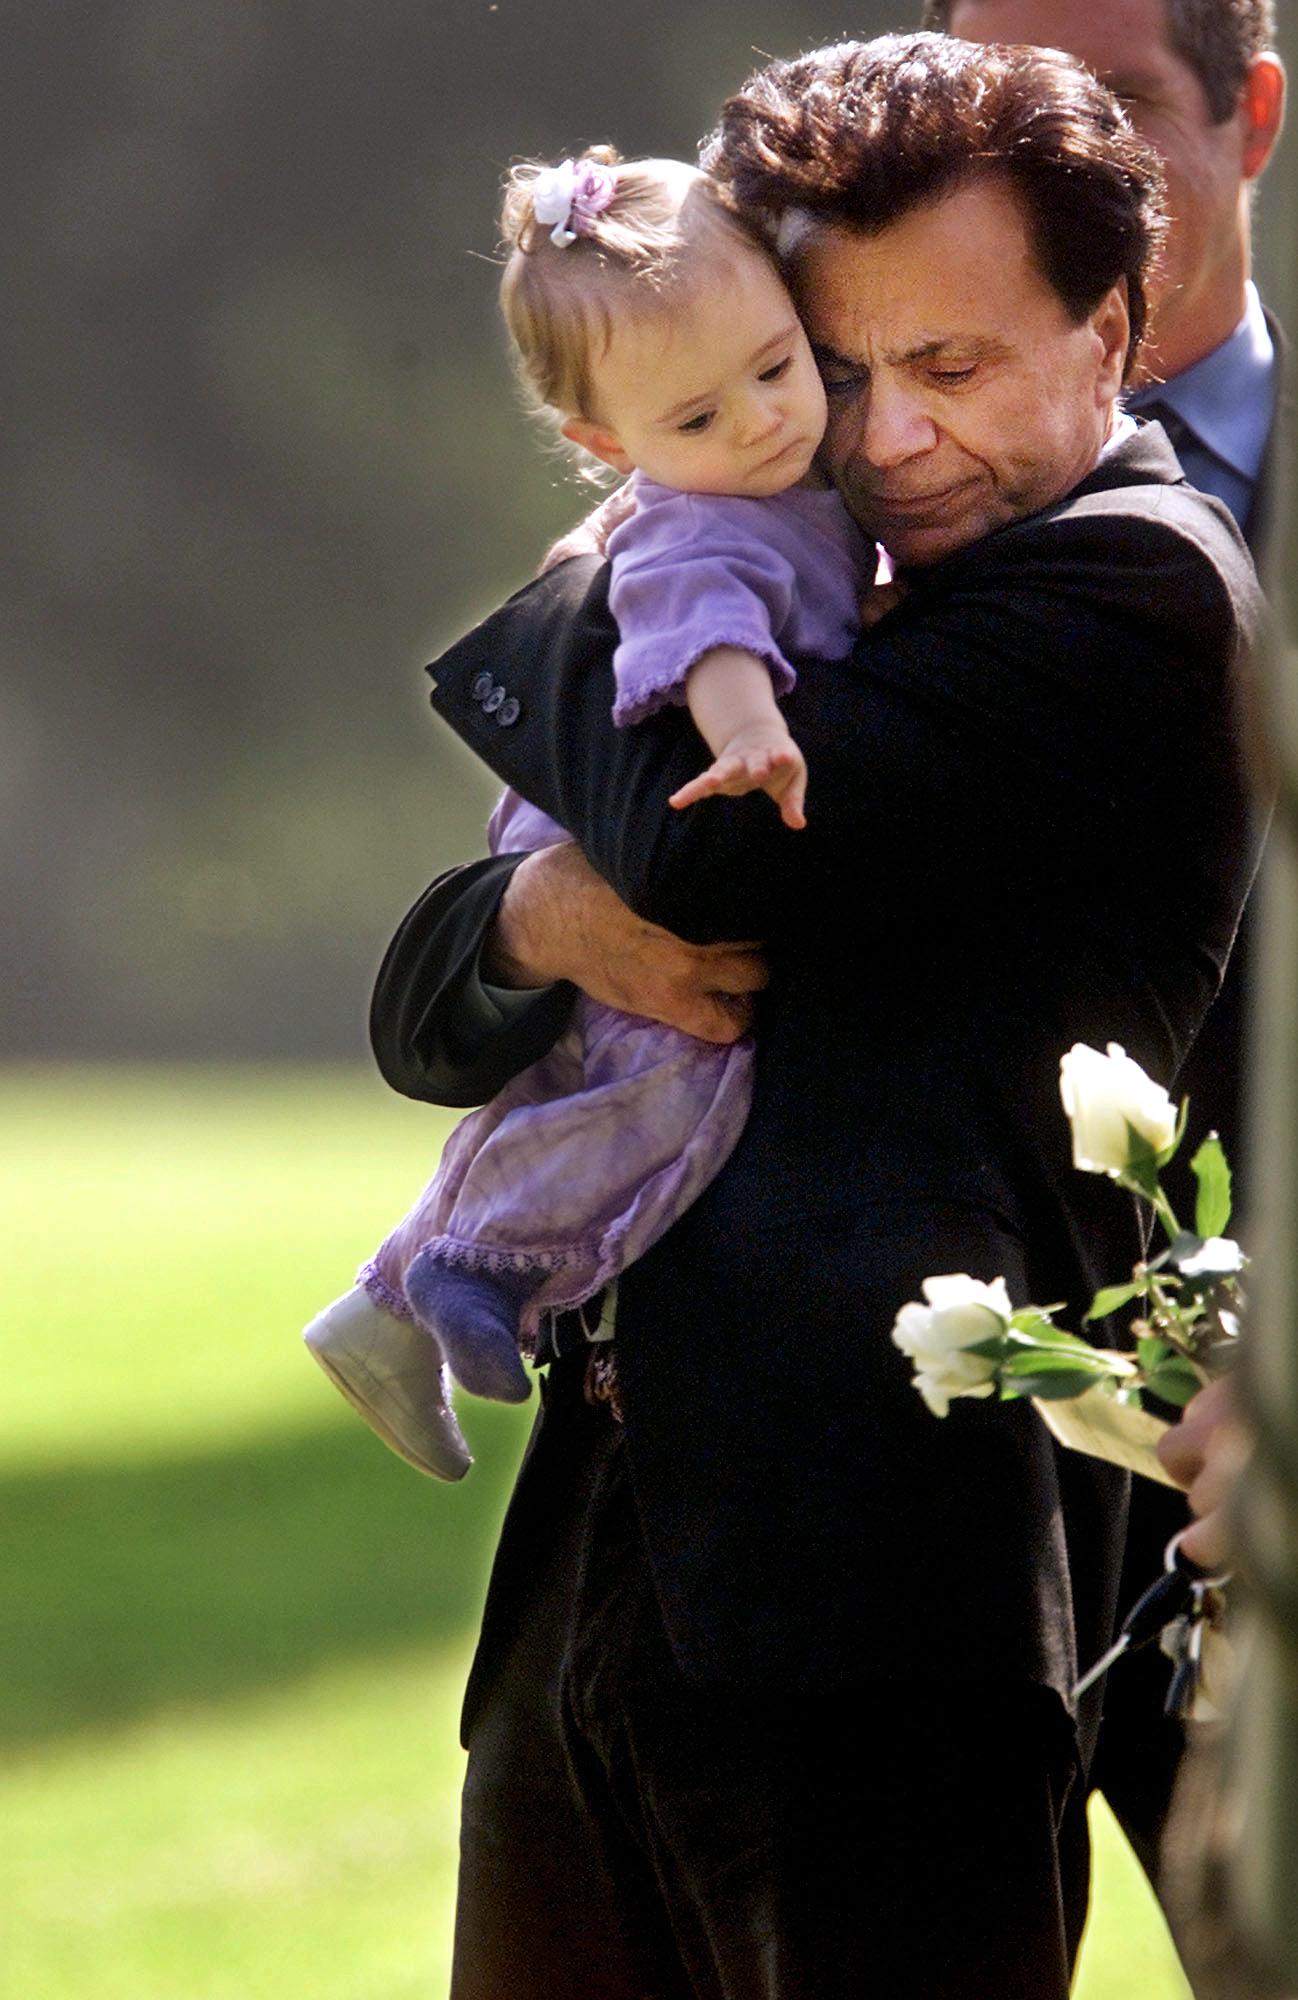 Robert Blake hugs his 11-month-old daughter Rose Lenore Sophie Blake, during a brief funeral ceremony for Bonny Lee Bakley in Los Angeles, on May 25, 2001 | Source: Getty Images